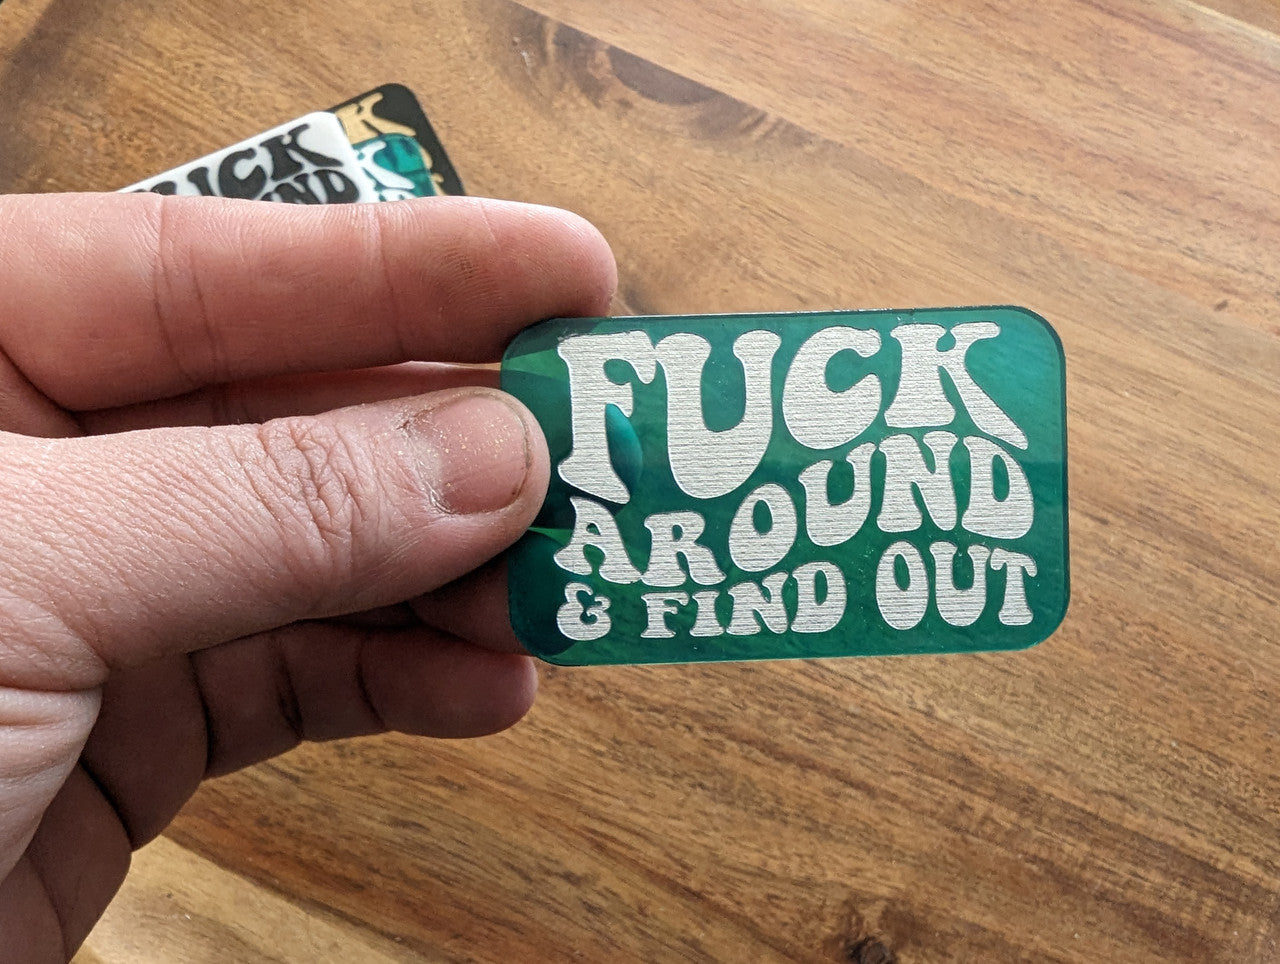 Fuck Around and Find Out Keychain